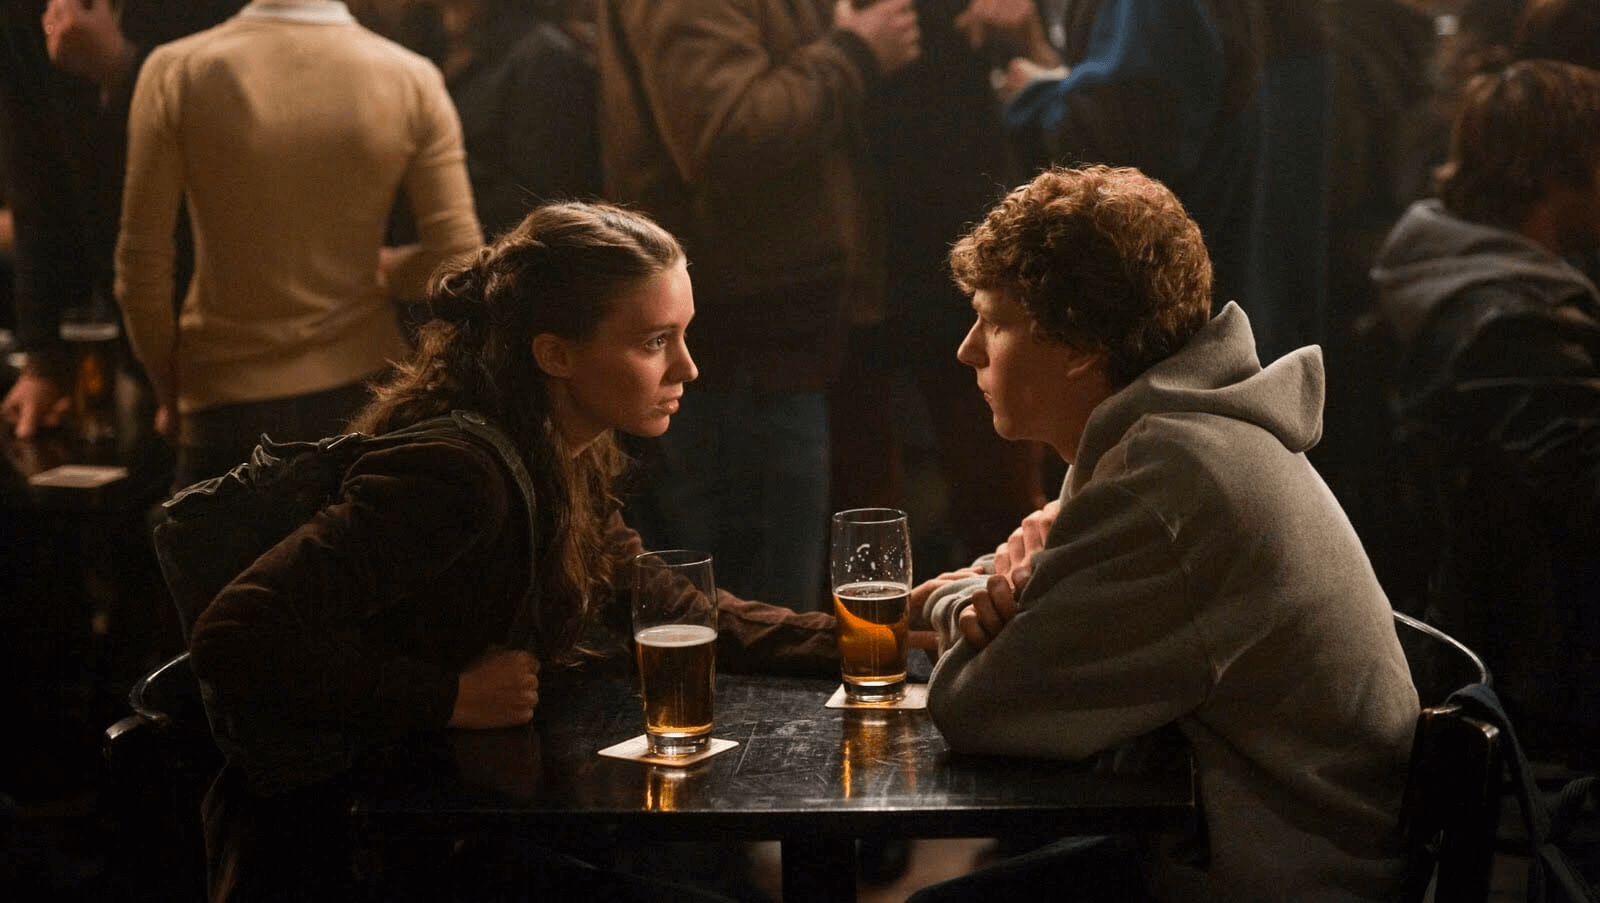 How to Write Dialogue An iconic dialogue scene from The Social Network